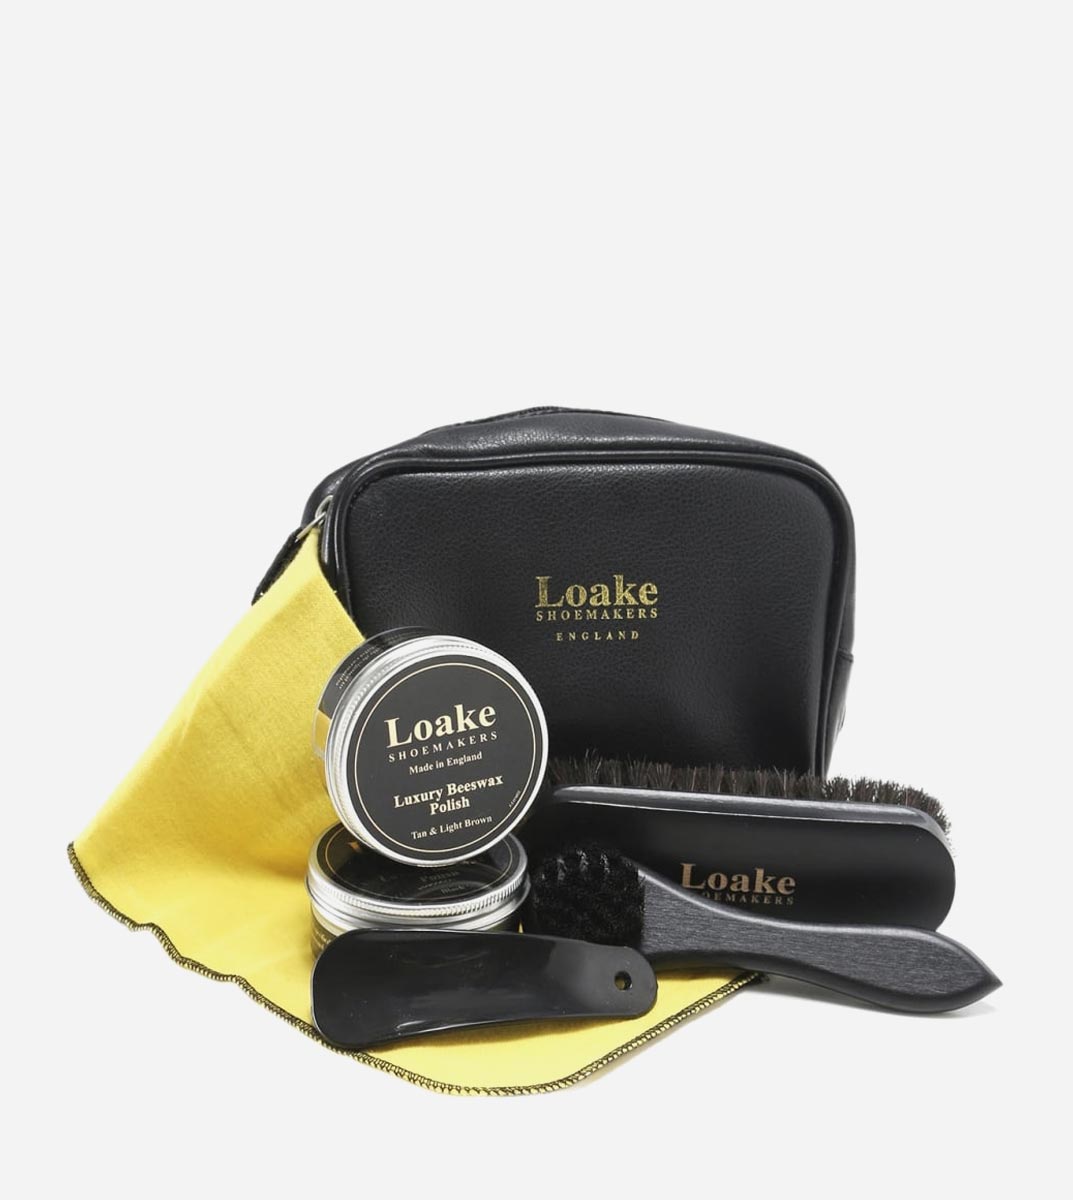 Buy the Loake Shoe Care Kit at 